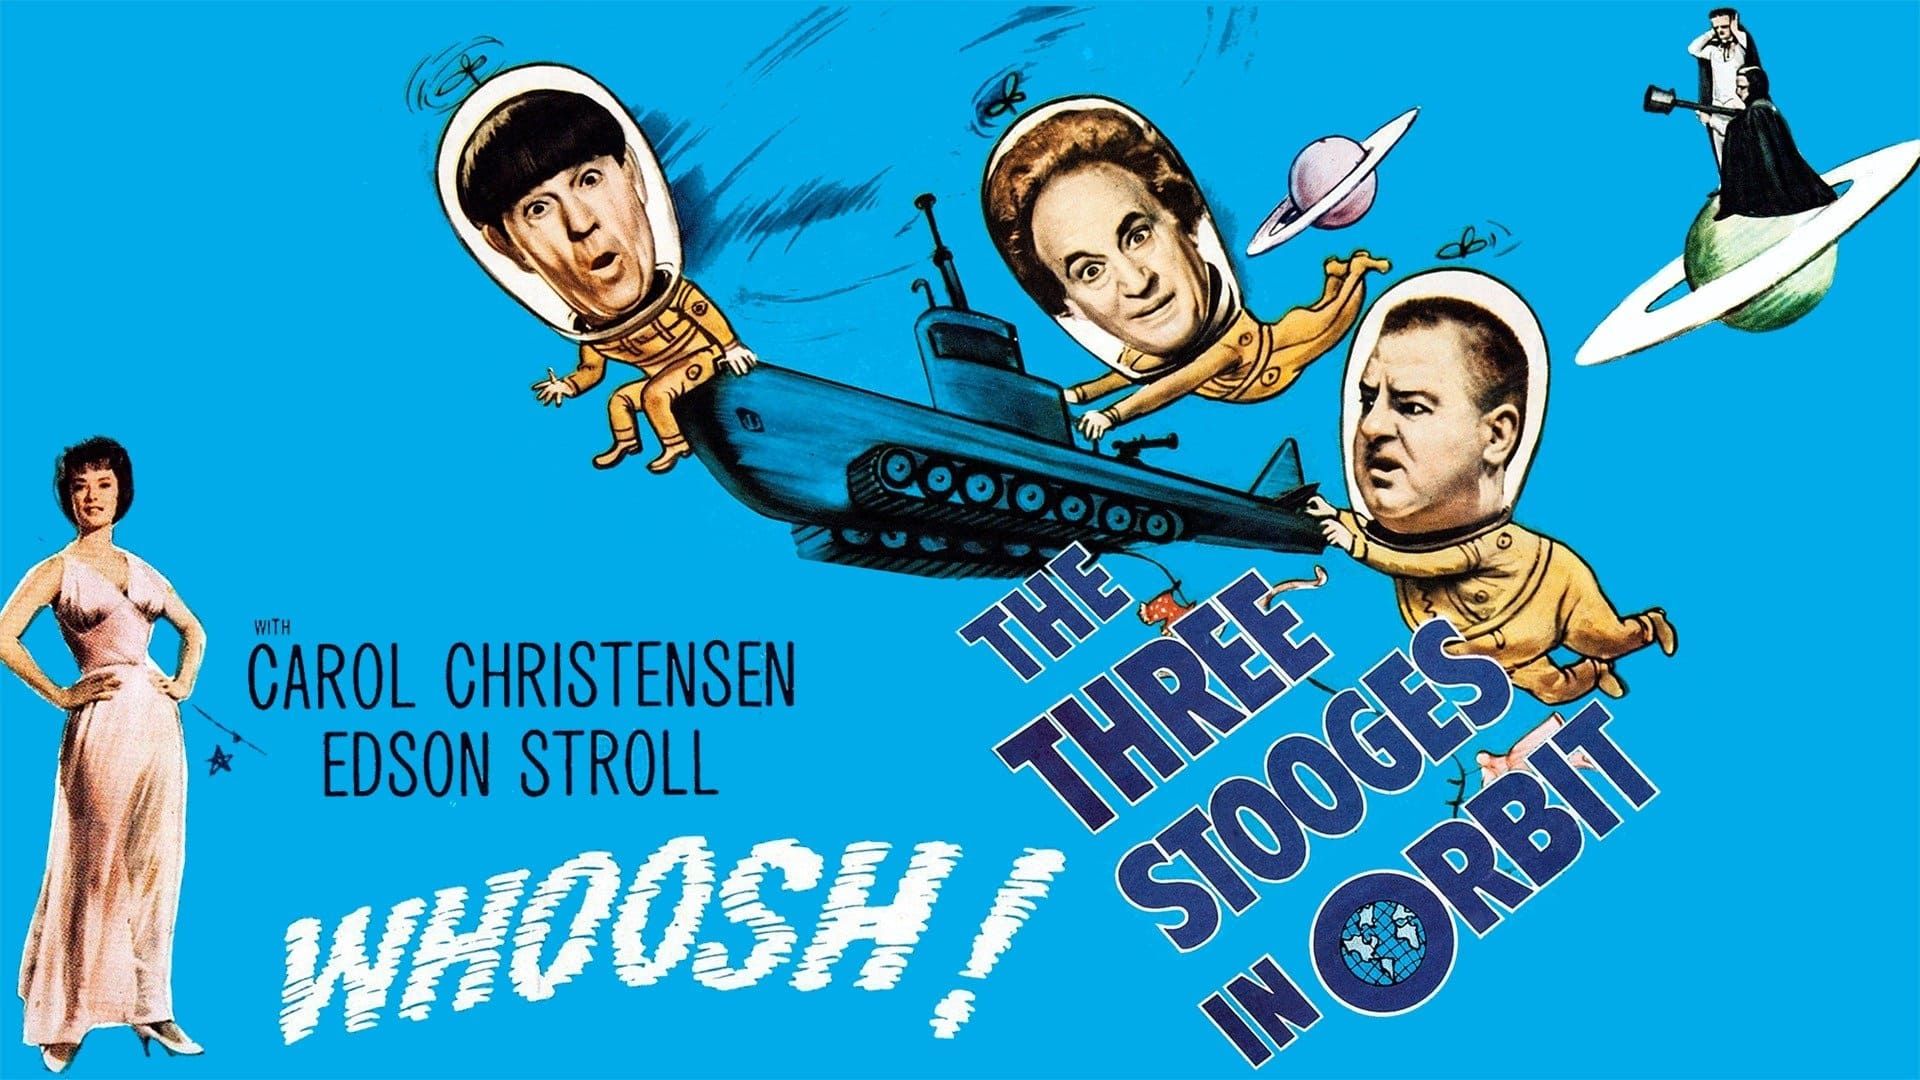 The Three Stooges in Orbit background